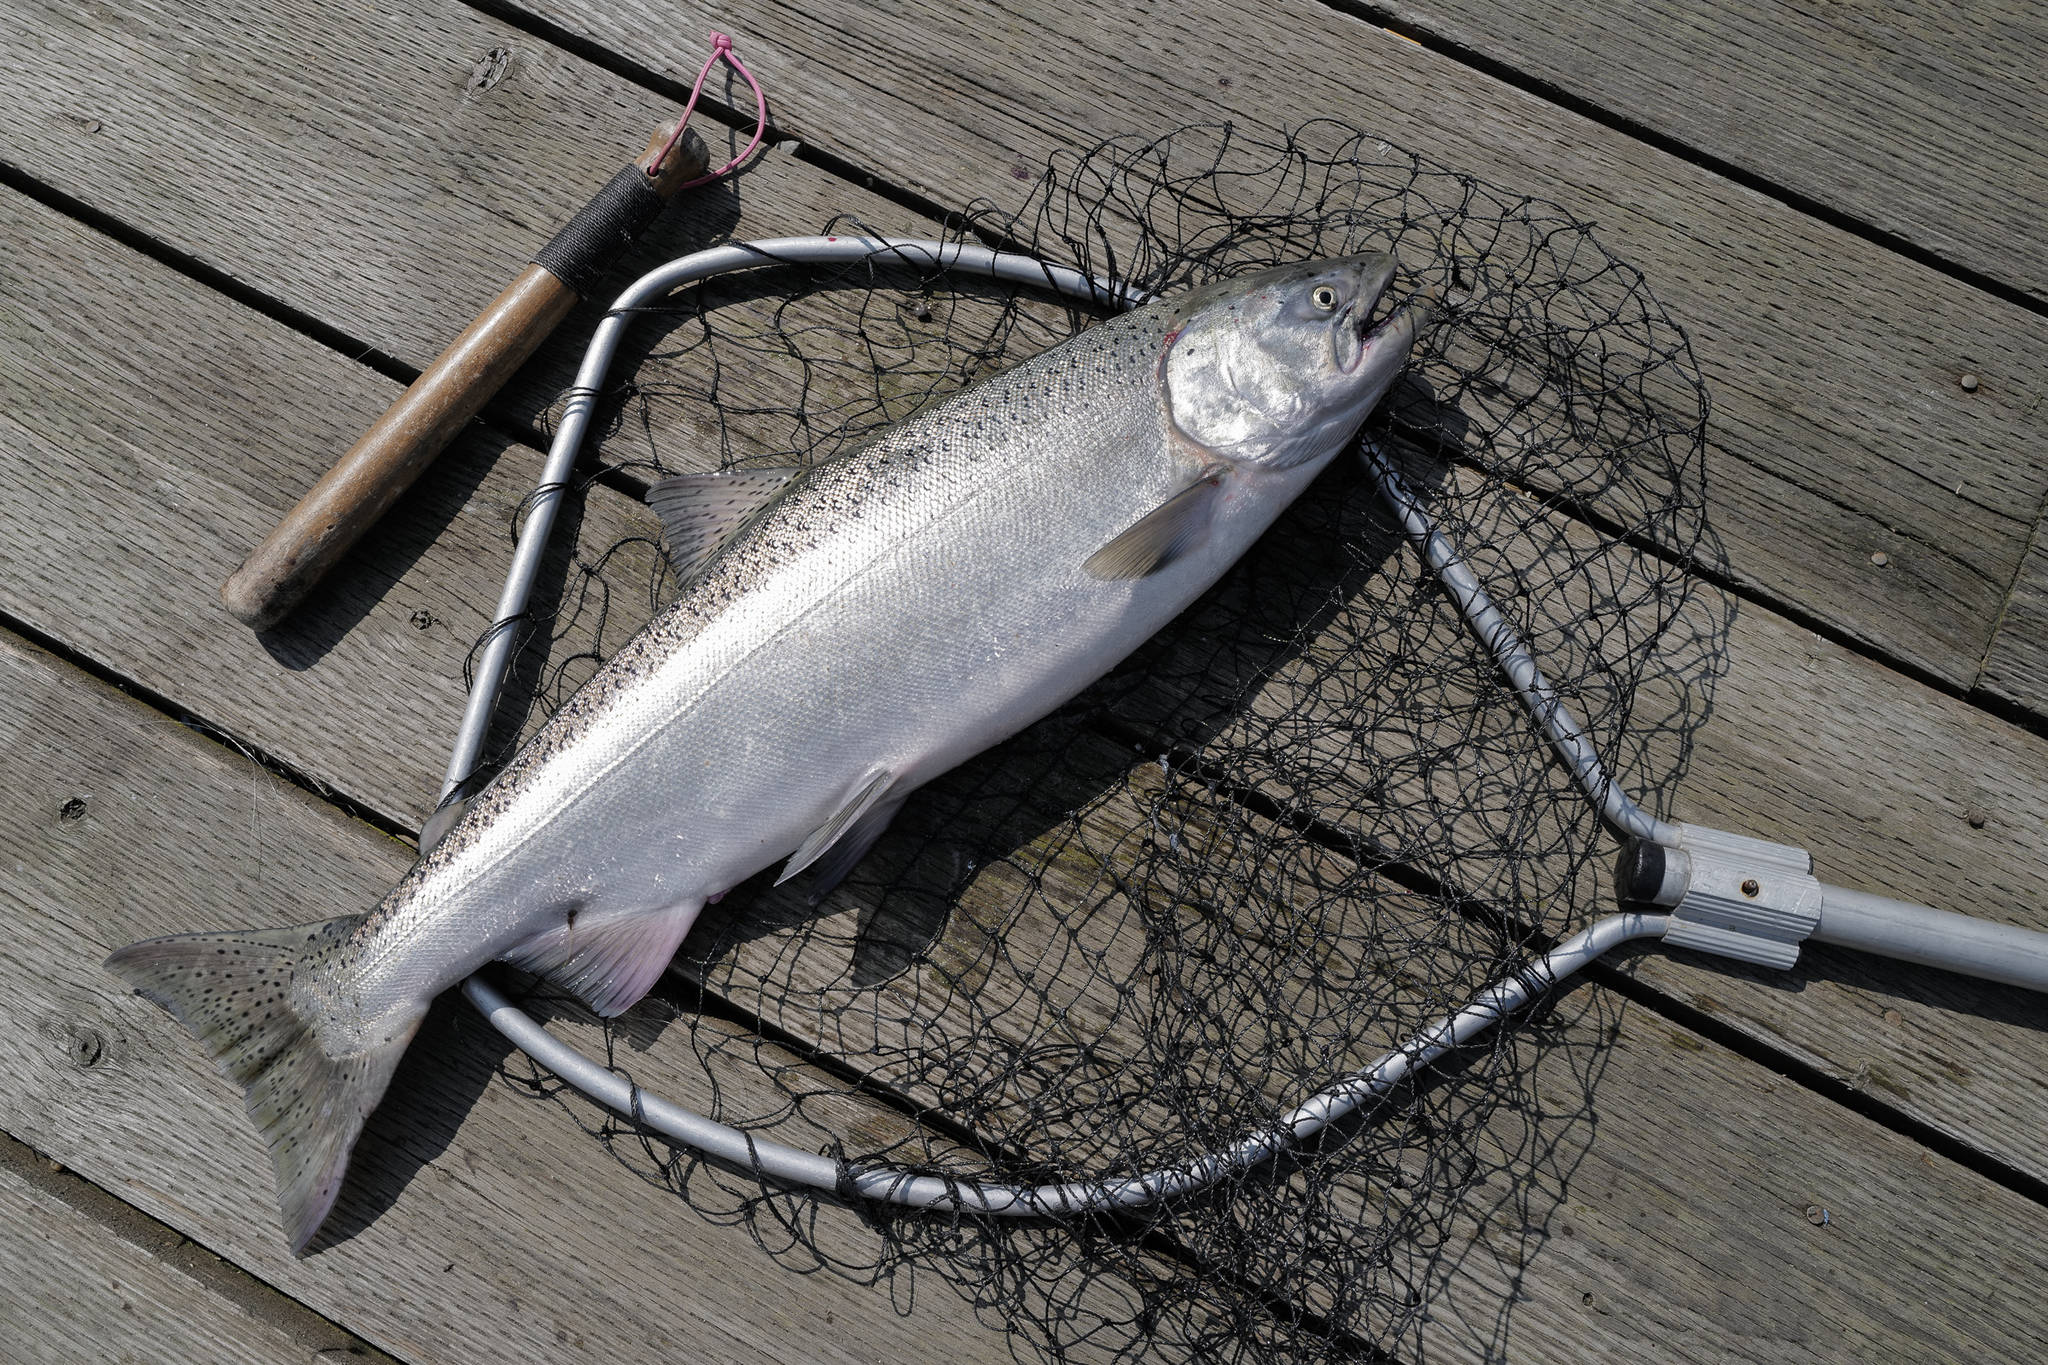 A freshly caught king salmon at the Wayside Park on Channel Drive on Thursday, June 20, 2019. (Michael Penn | Juneau Empire)